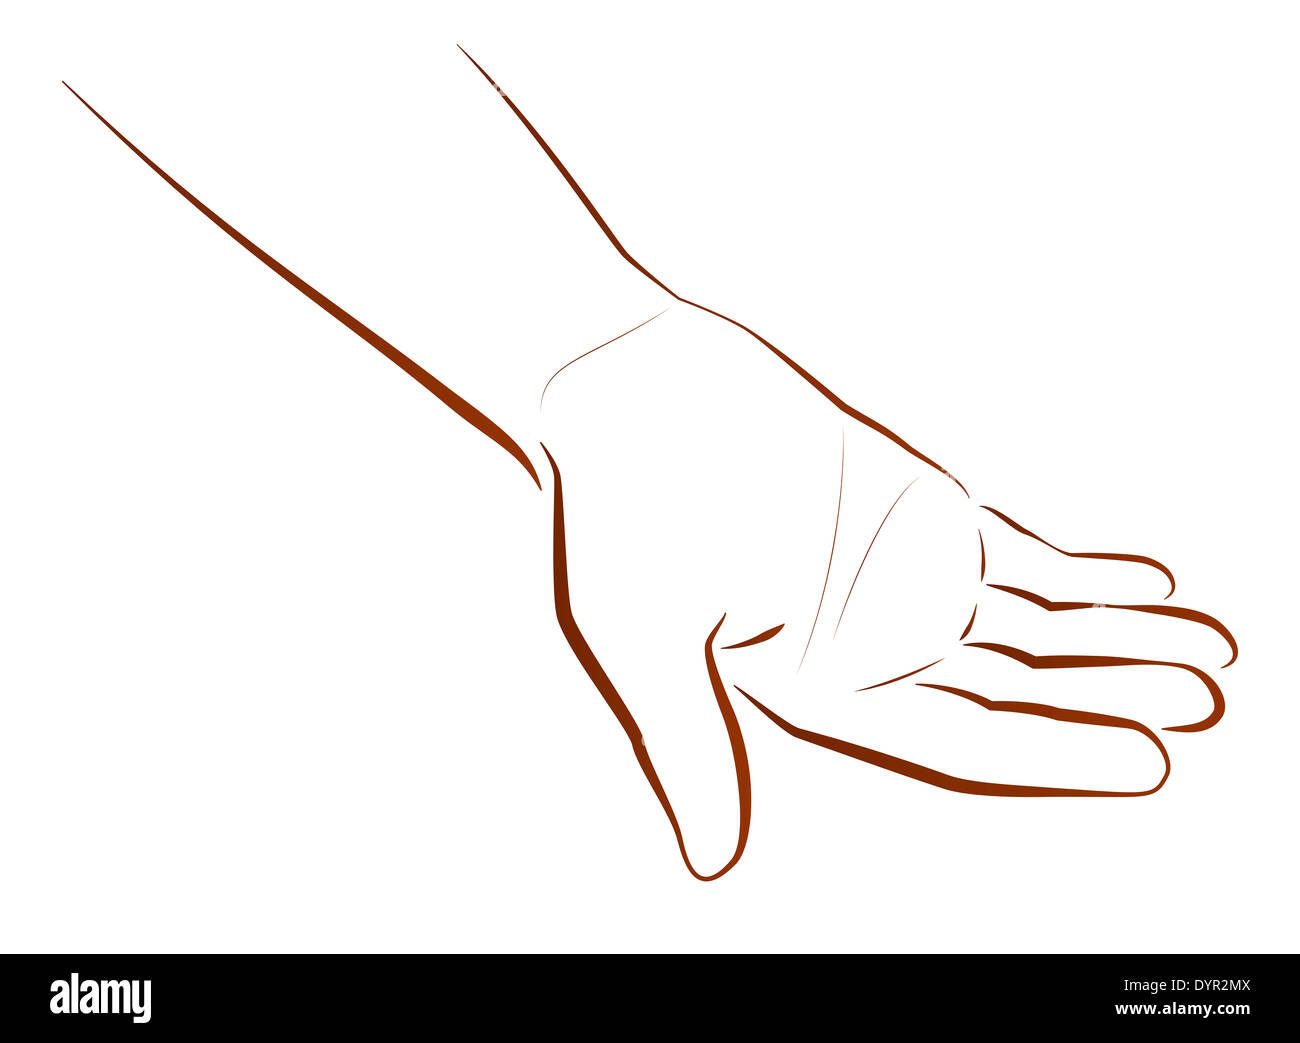 Outline illustration of a hand that is begging. Stock Photo